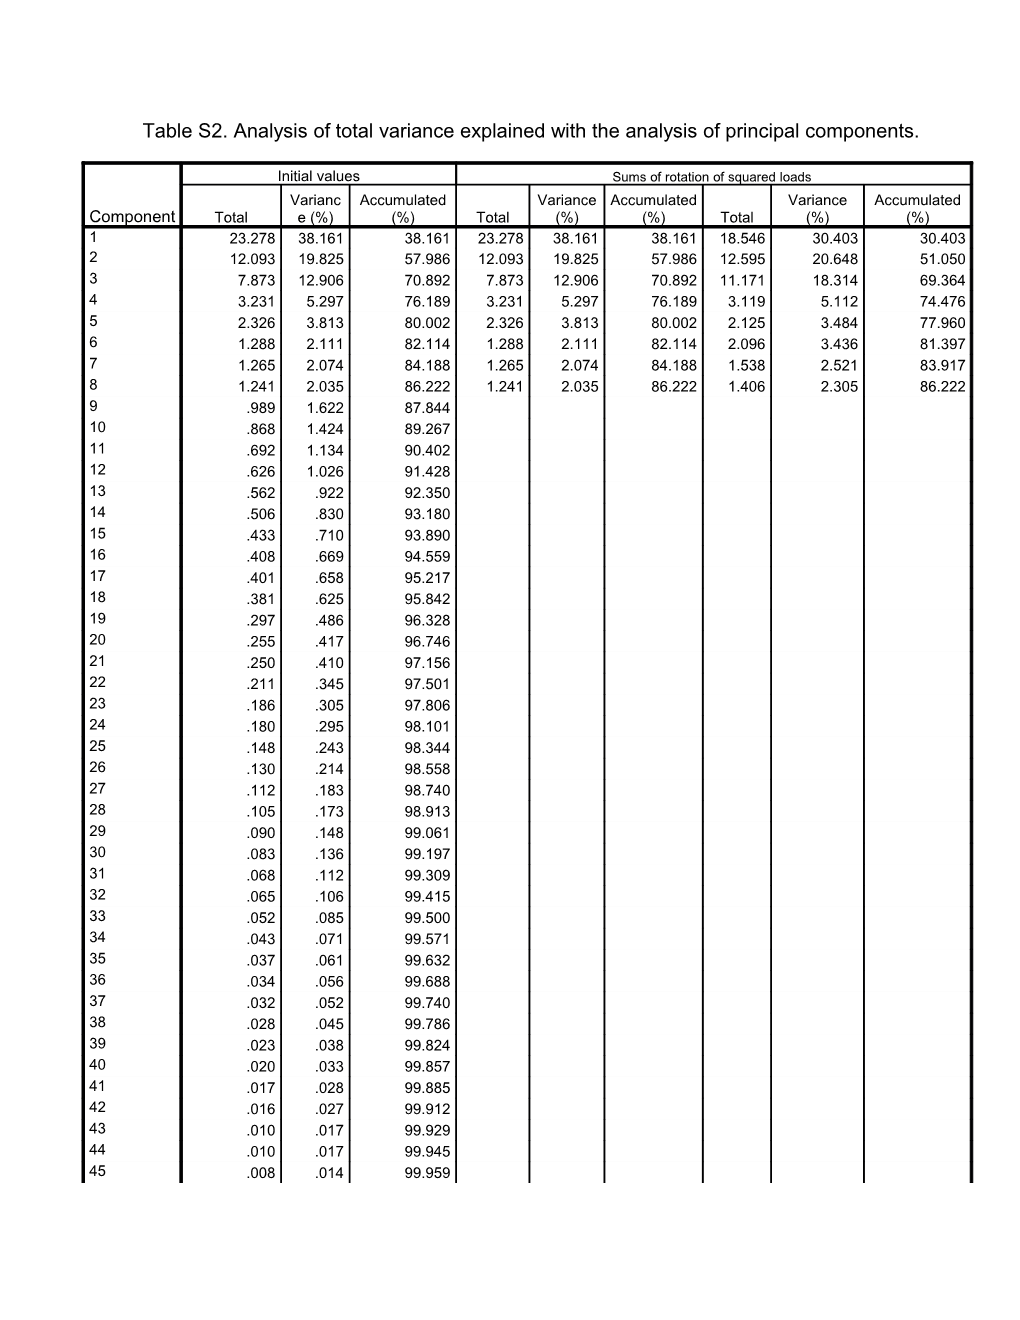 Table S2. Analysis of Total Variance Explained with the Analysis of Principal Components